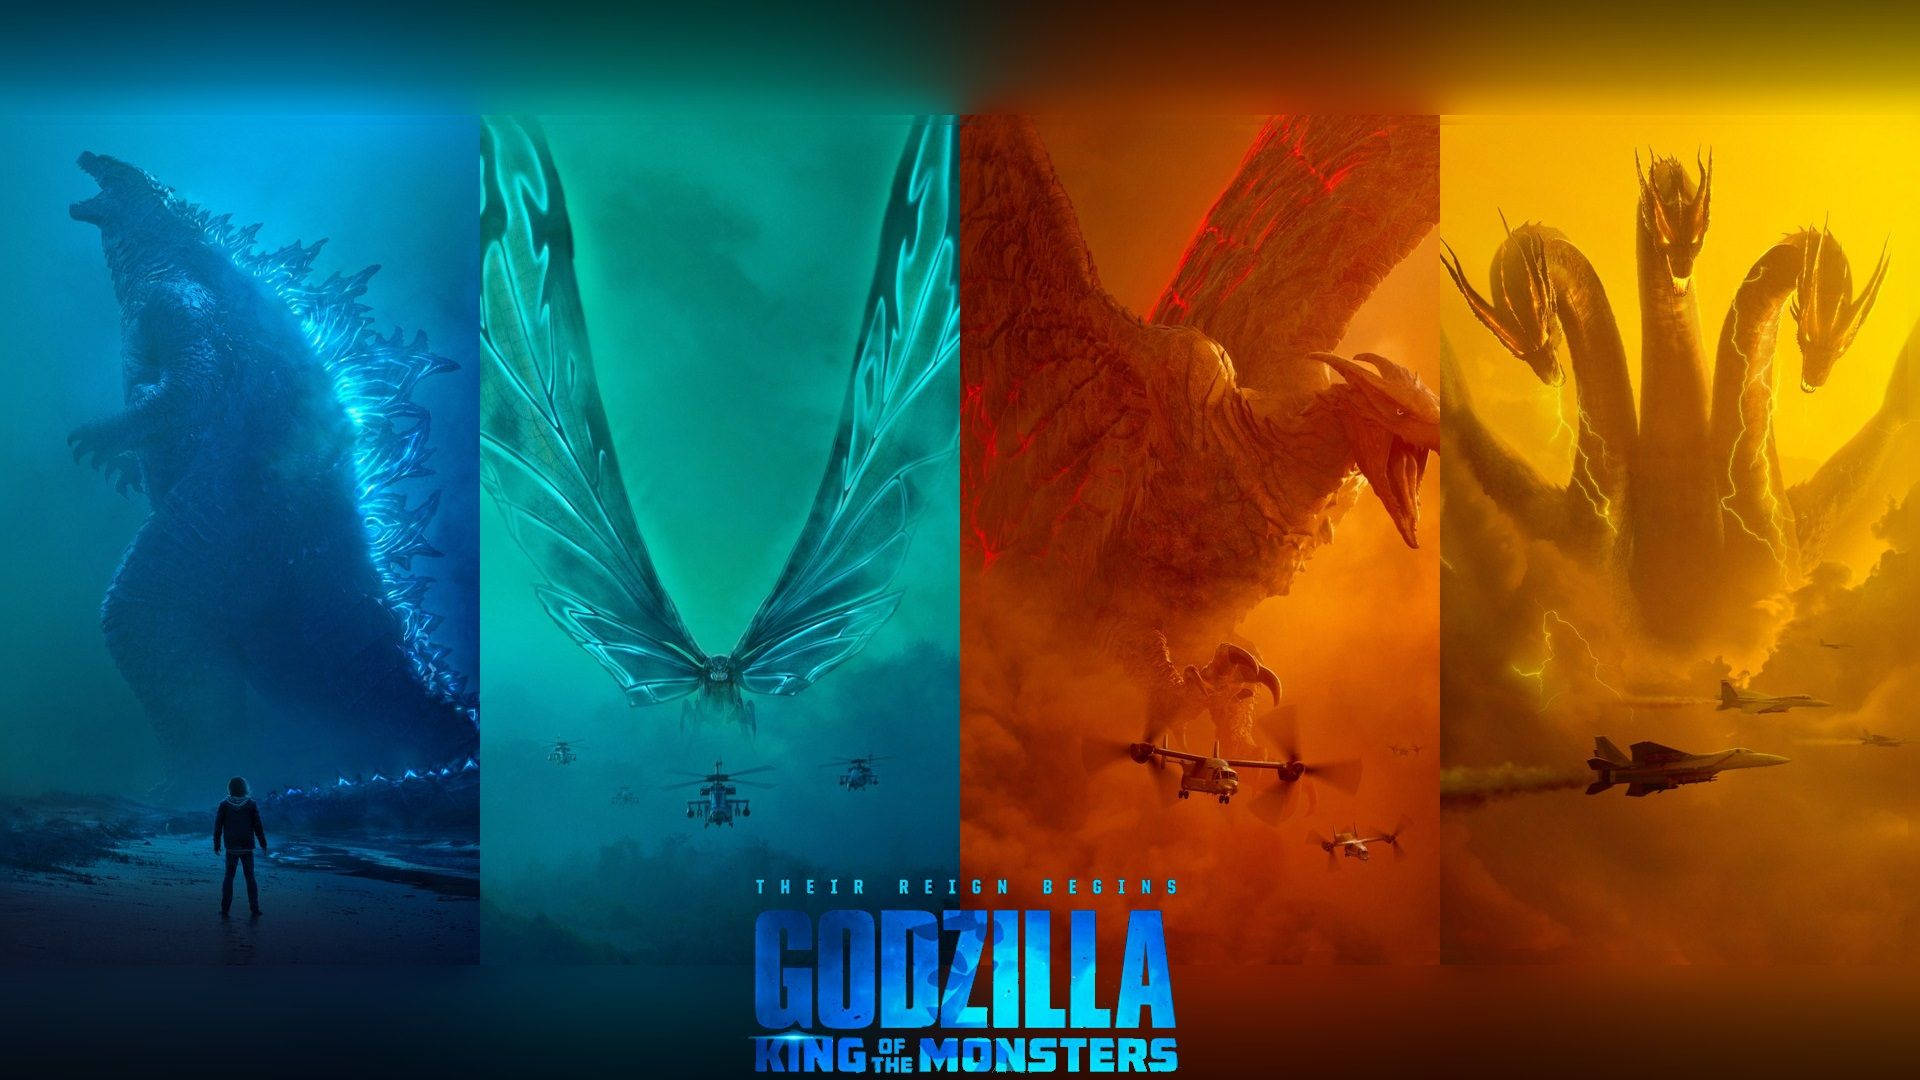 Free Godzilla King Of The Monsters Wallpaper Downloads, [100+] Godzilla  King Of The Monsters Wallpapers for FREE 